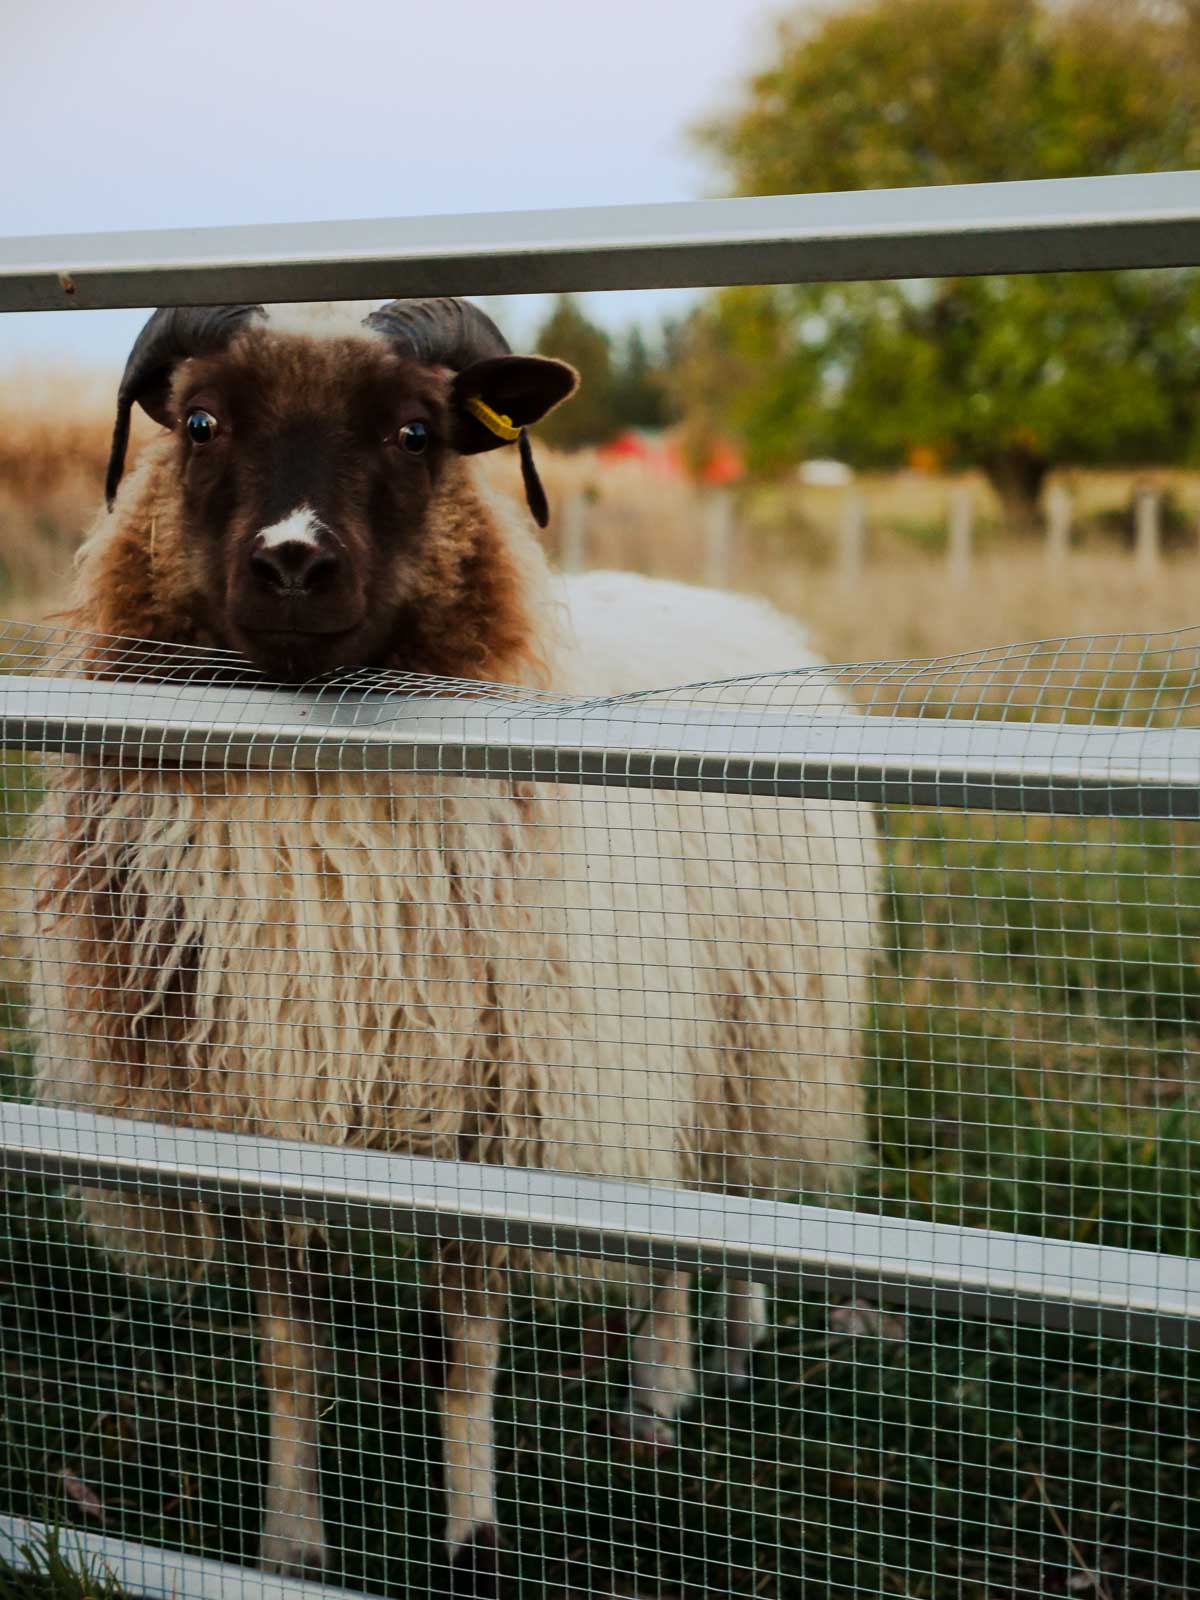 A horned white and brown Icelandic ewe leaning up against a metal gate in her pasture.